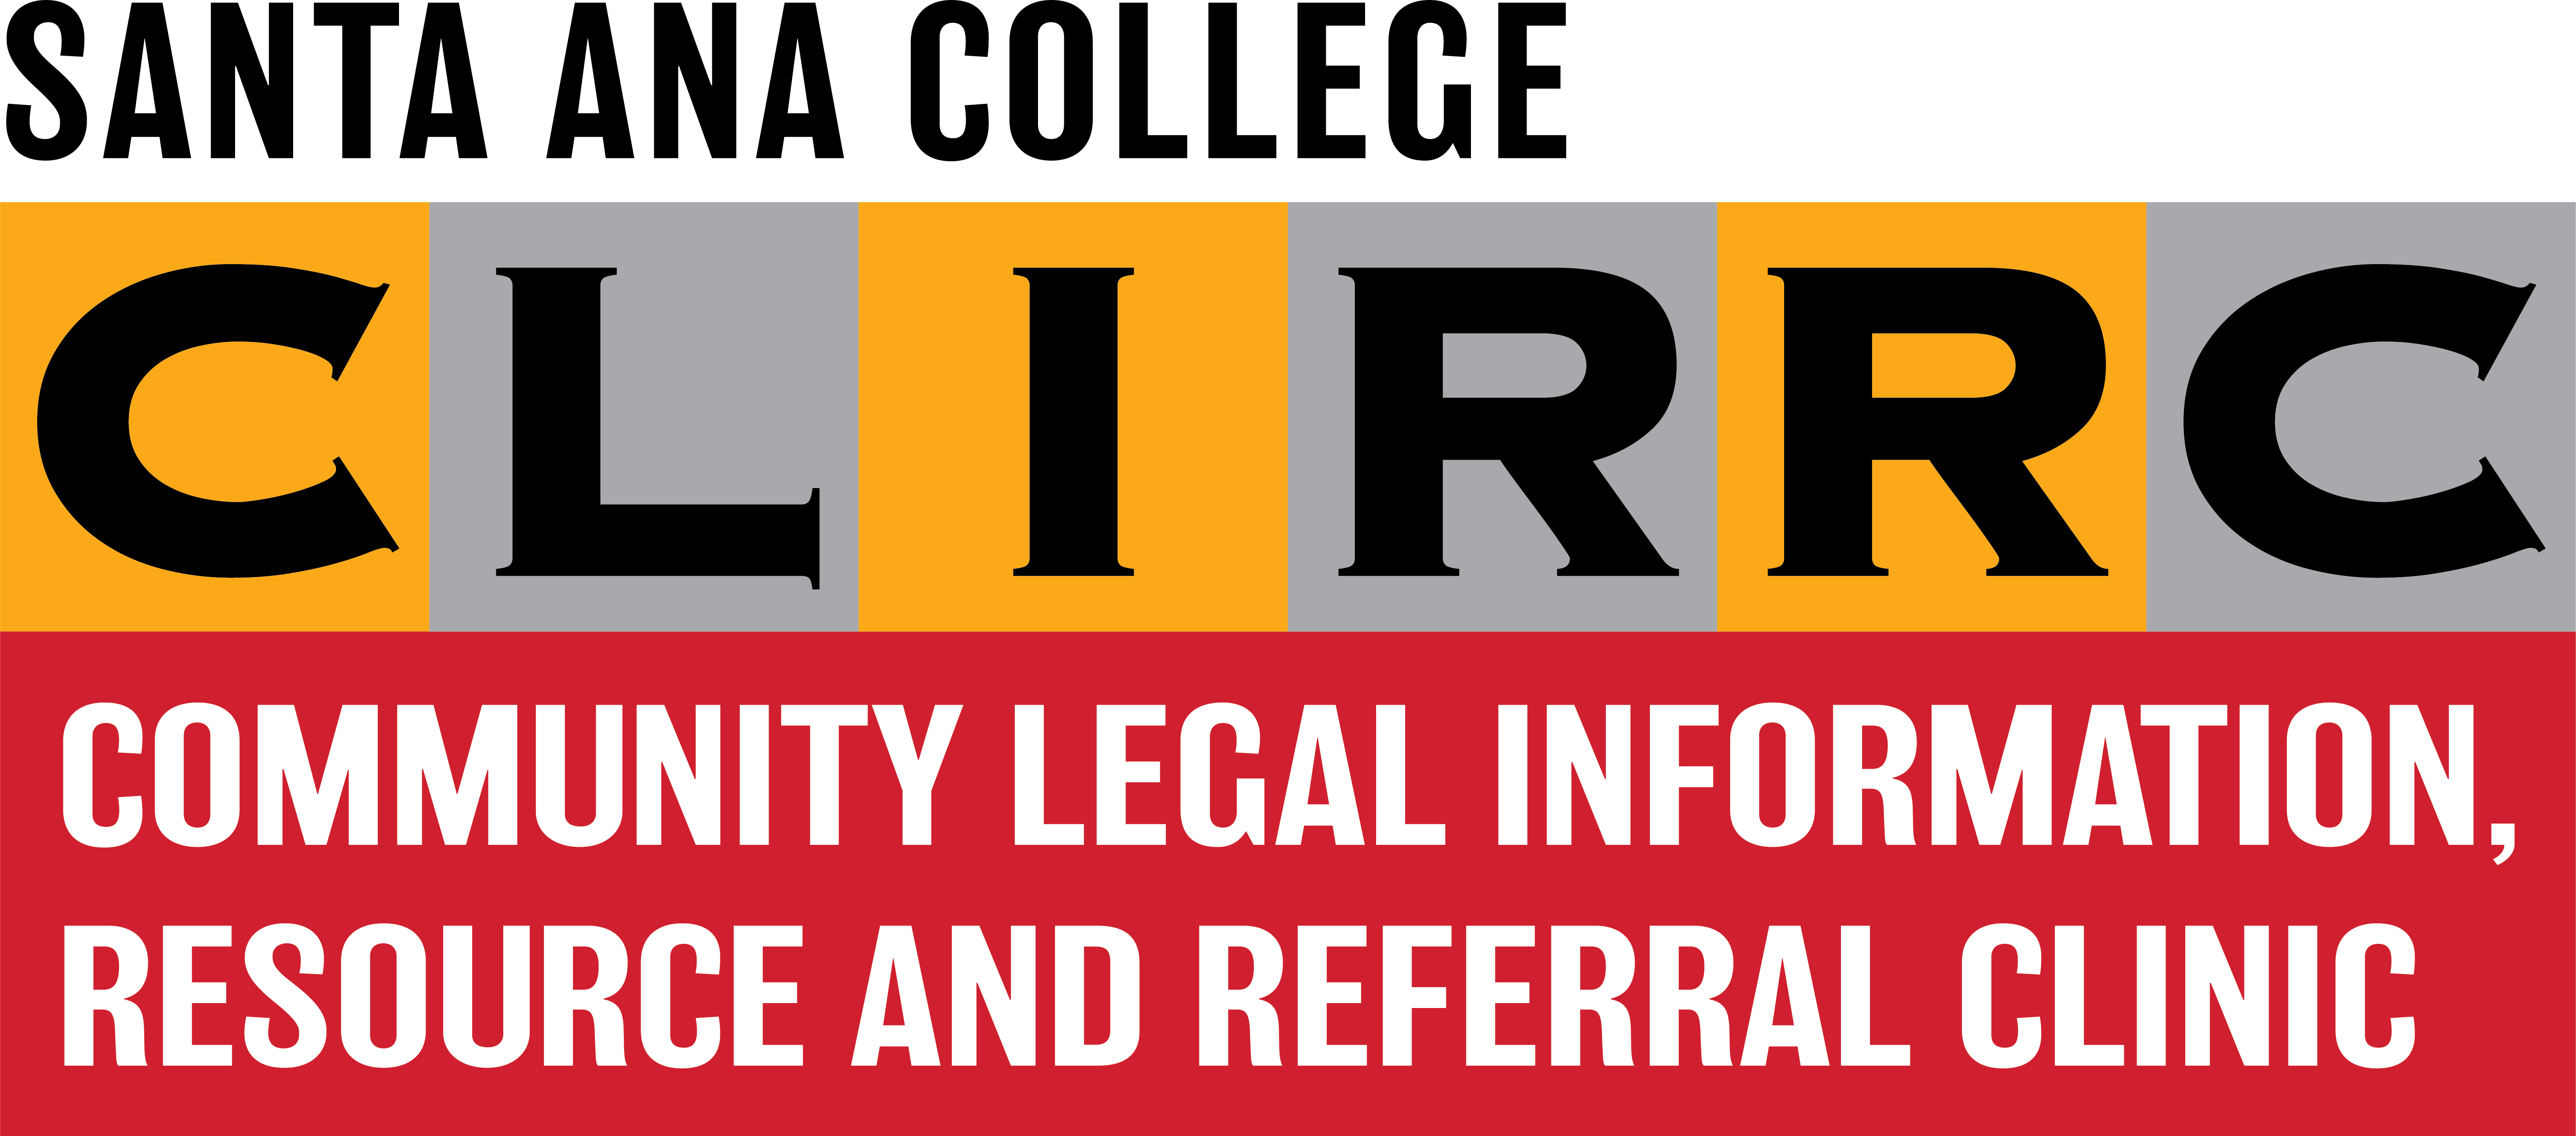 SAC Community legal information resource and referral clinic